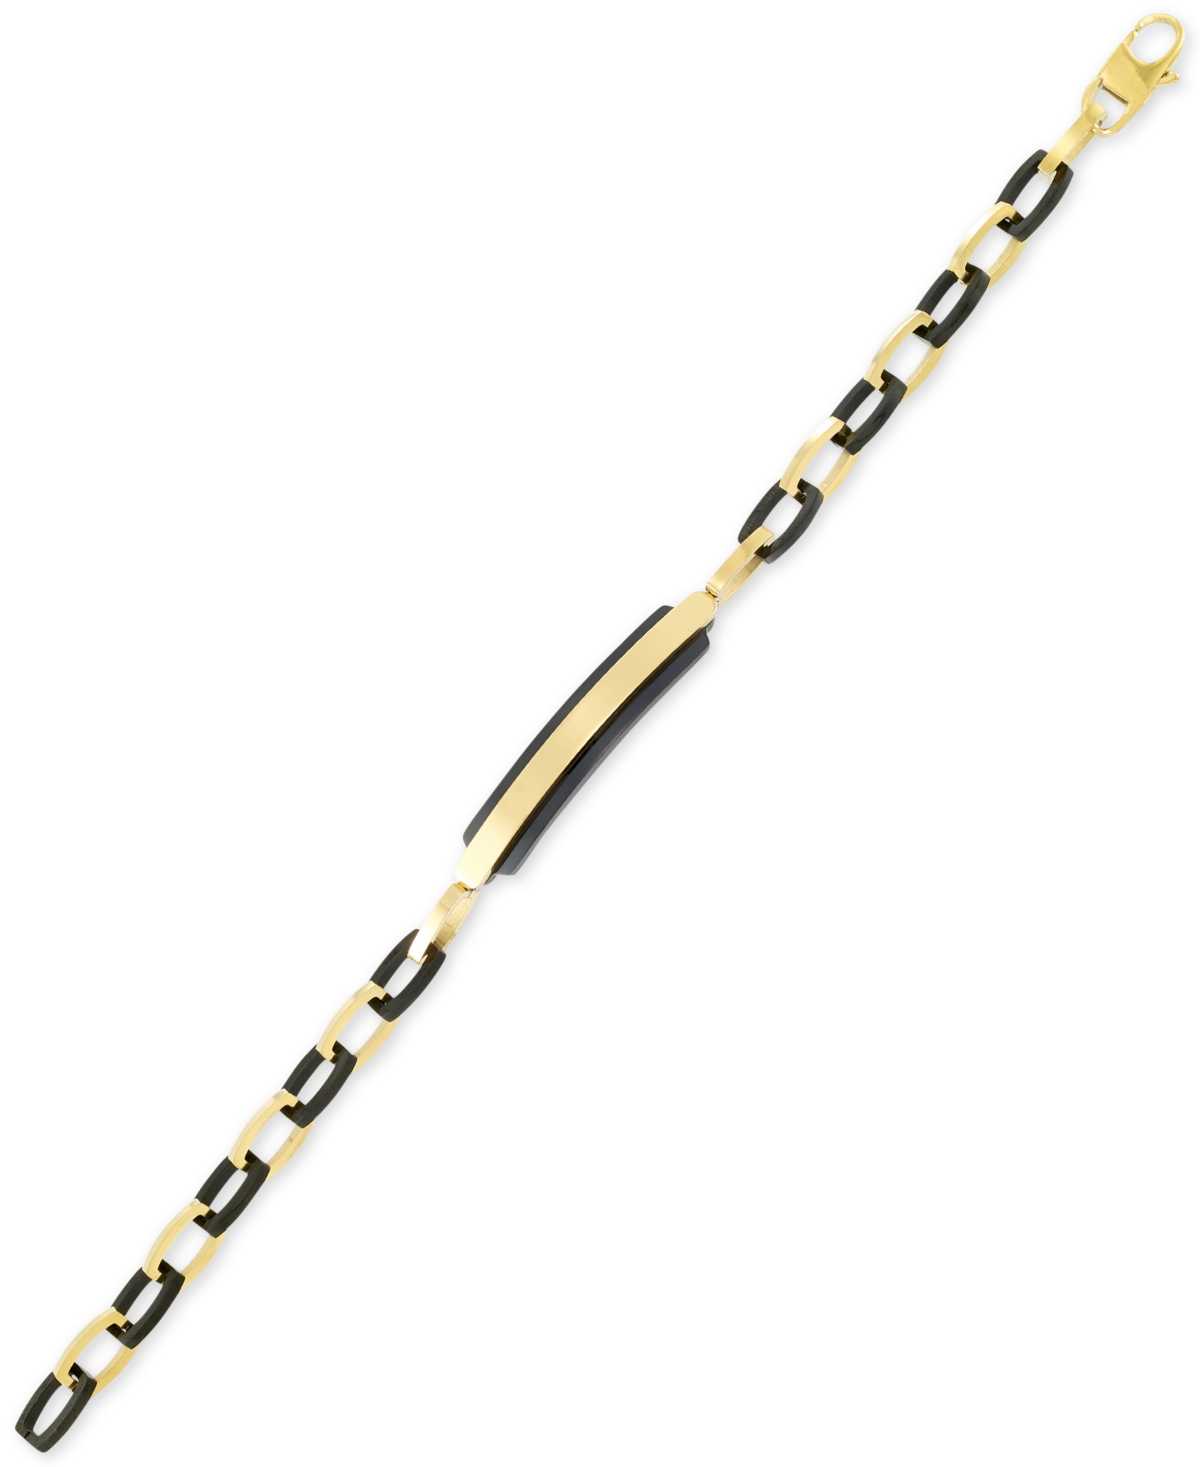 Smith Two-Tone Id Plate Bracelet in Black & Yellow Ion-Plated Stainless Steel - Black/Gold Tone